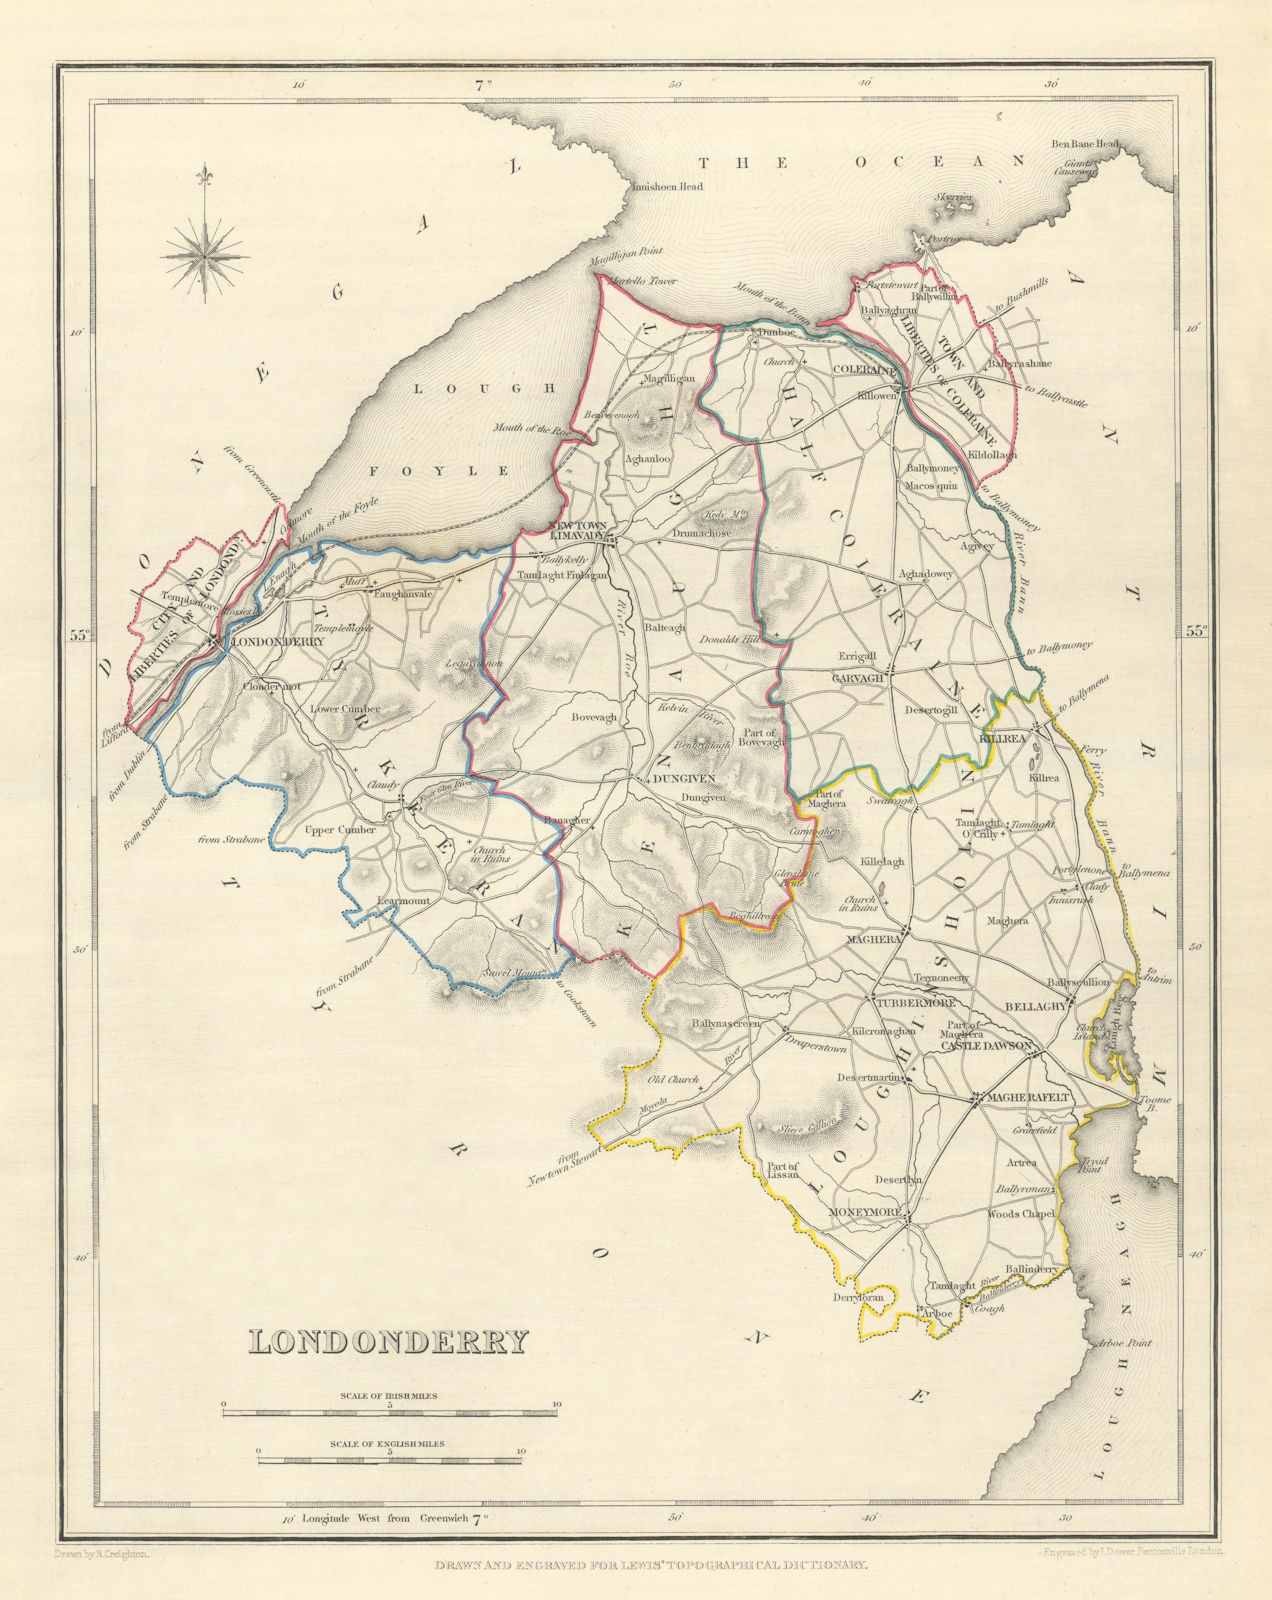 Associate Product COUNTY LONDONDERRY antique map for LEWIS by CREIGHTON & DOWER. Ulster 1850